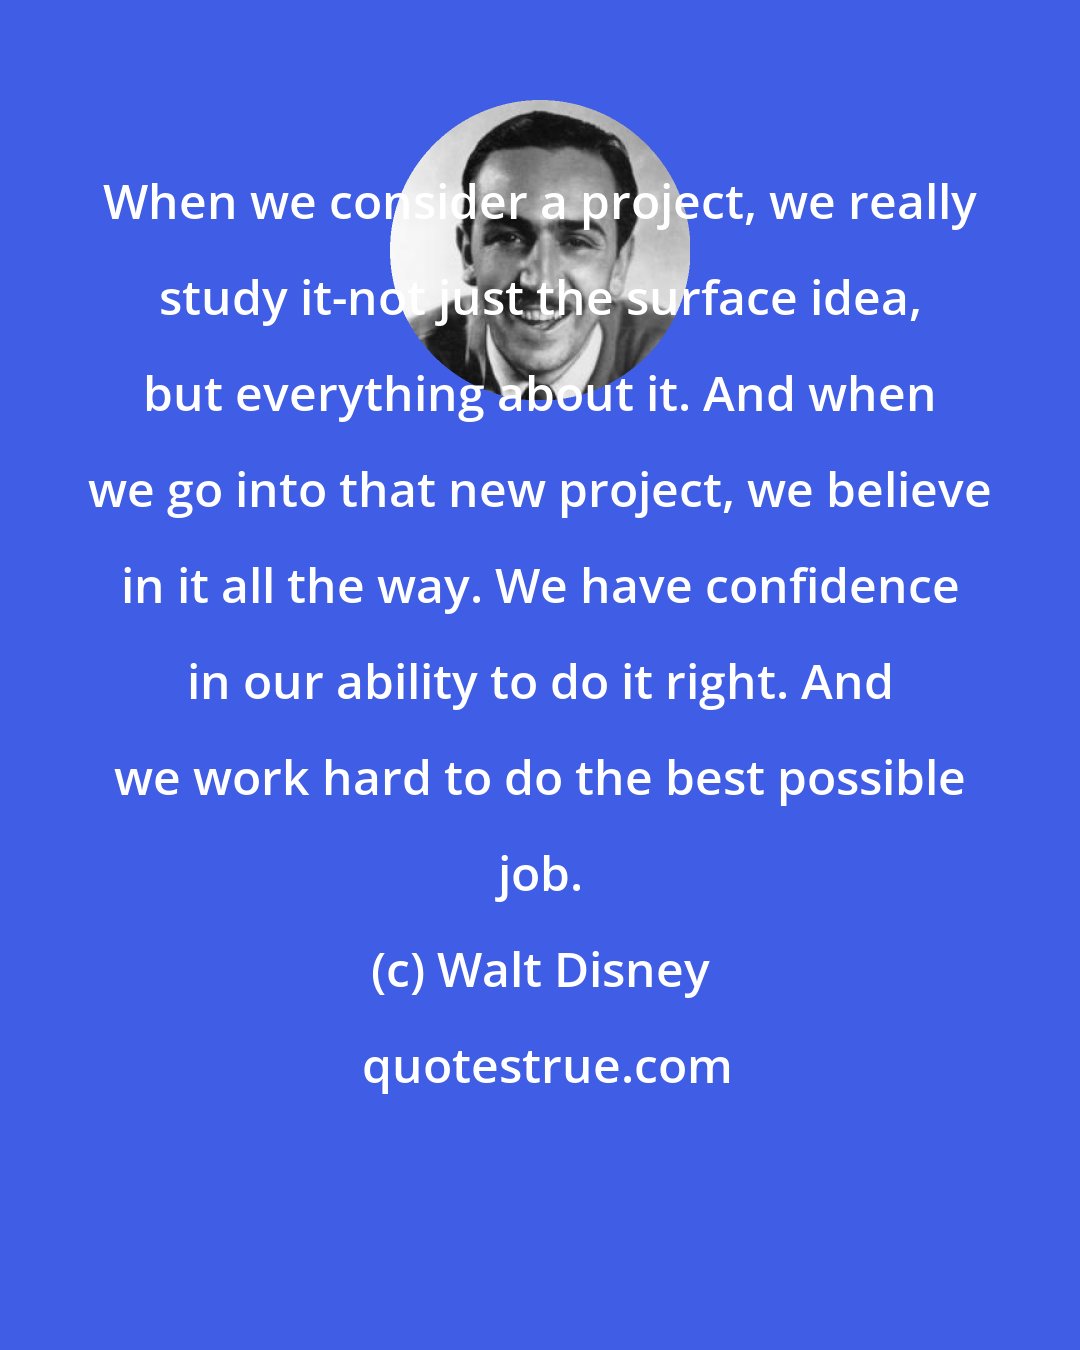 Walt Disney: When we consider a project, we really study it-not just the surface idea, but everything about it. And when we go into that new project, we believe in it all the way. We have confidence in our ability to do it right. And we work hard to do the best possible job.